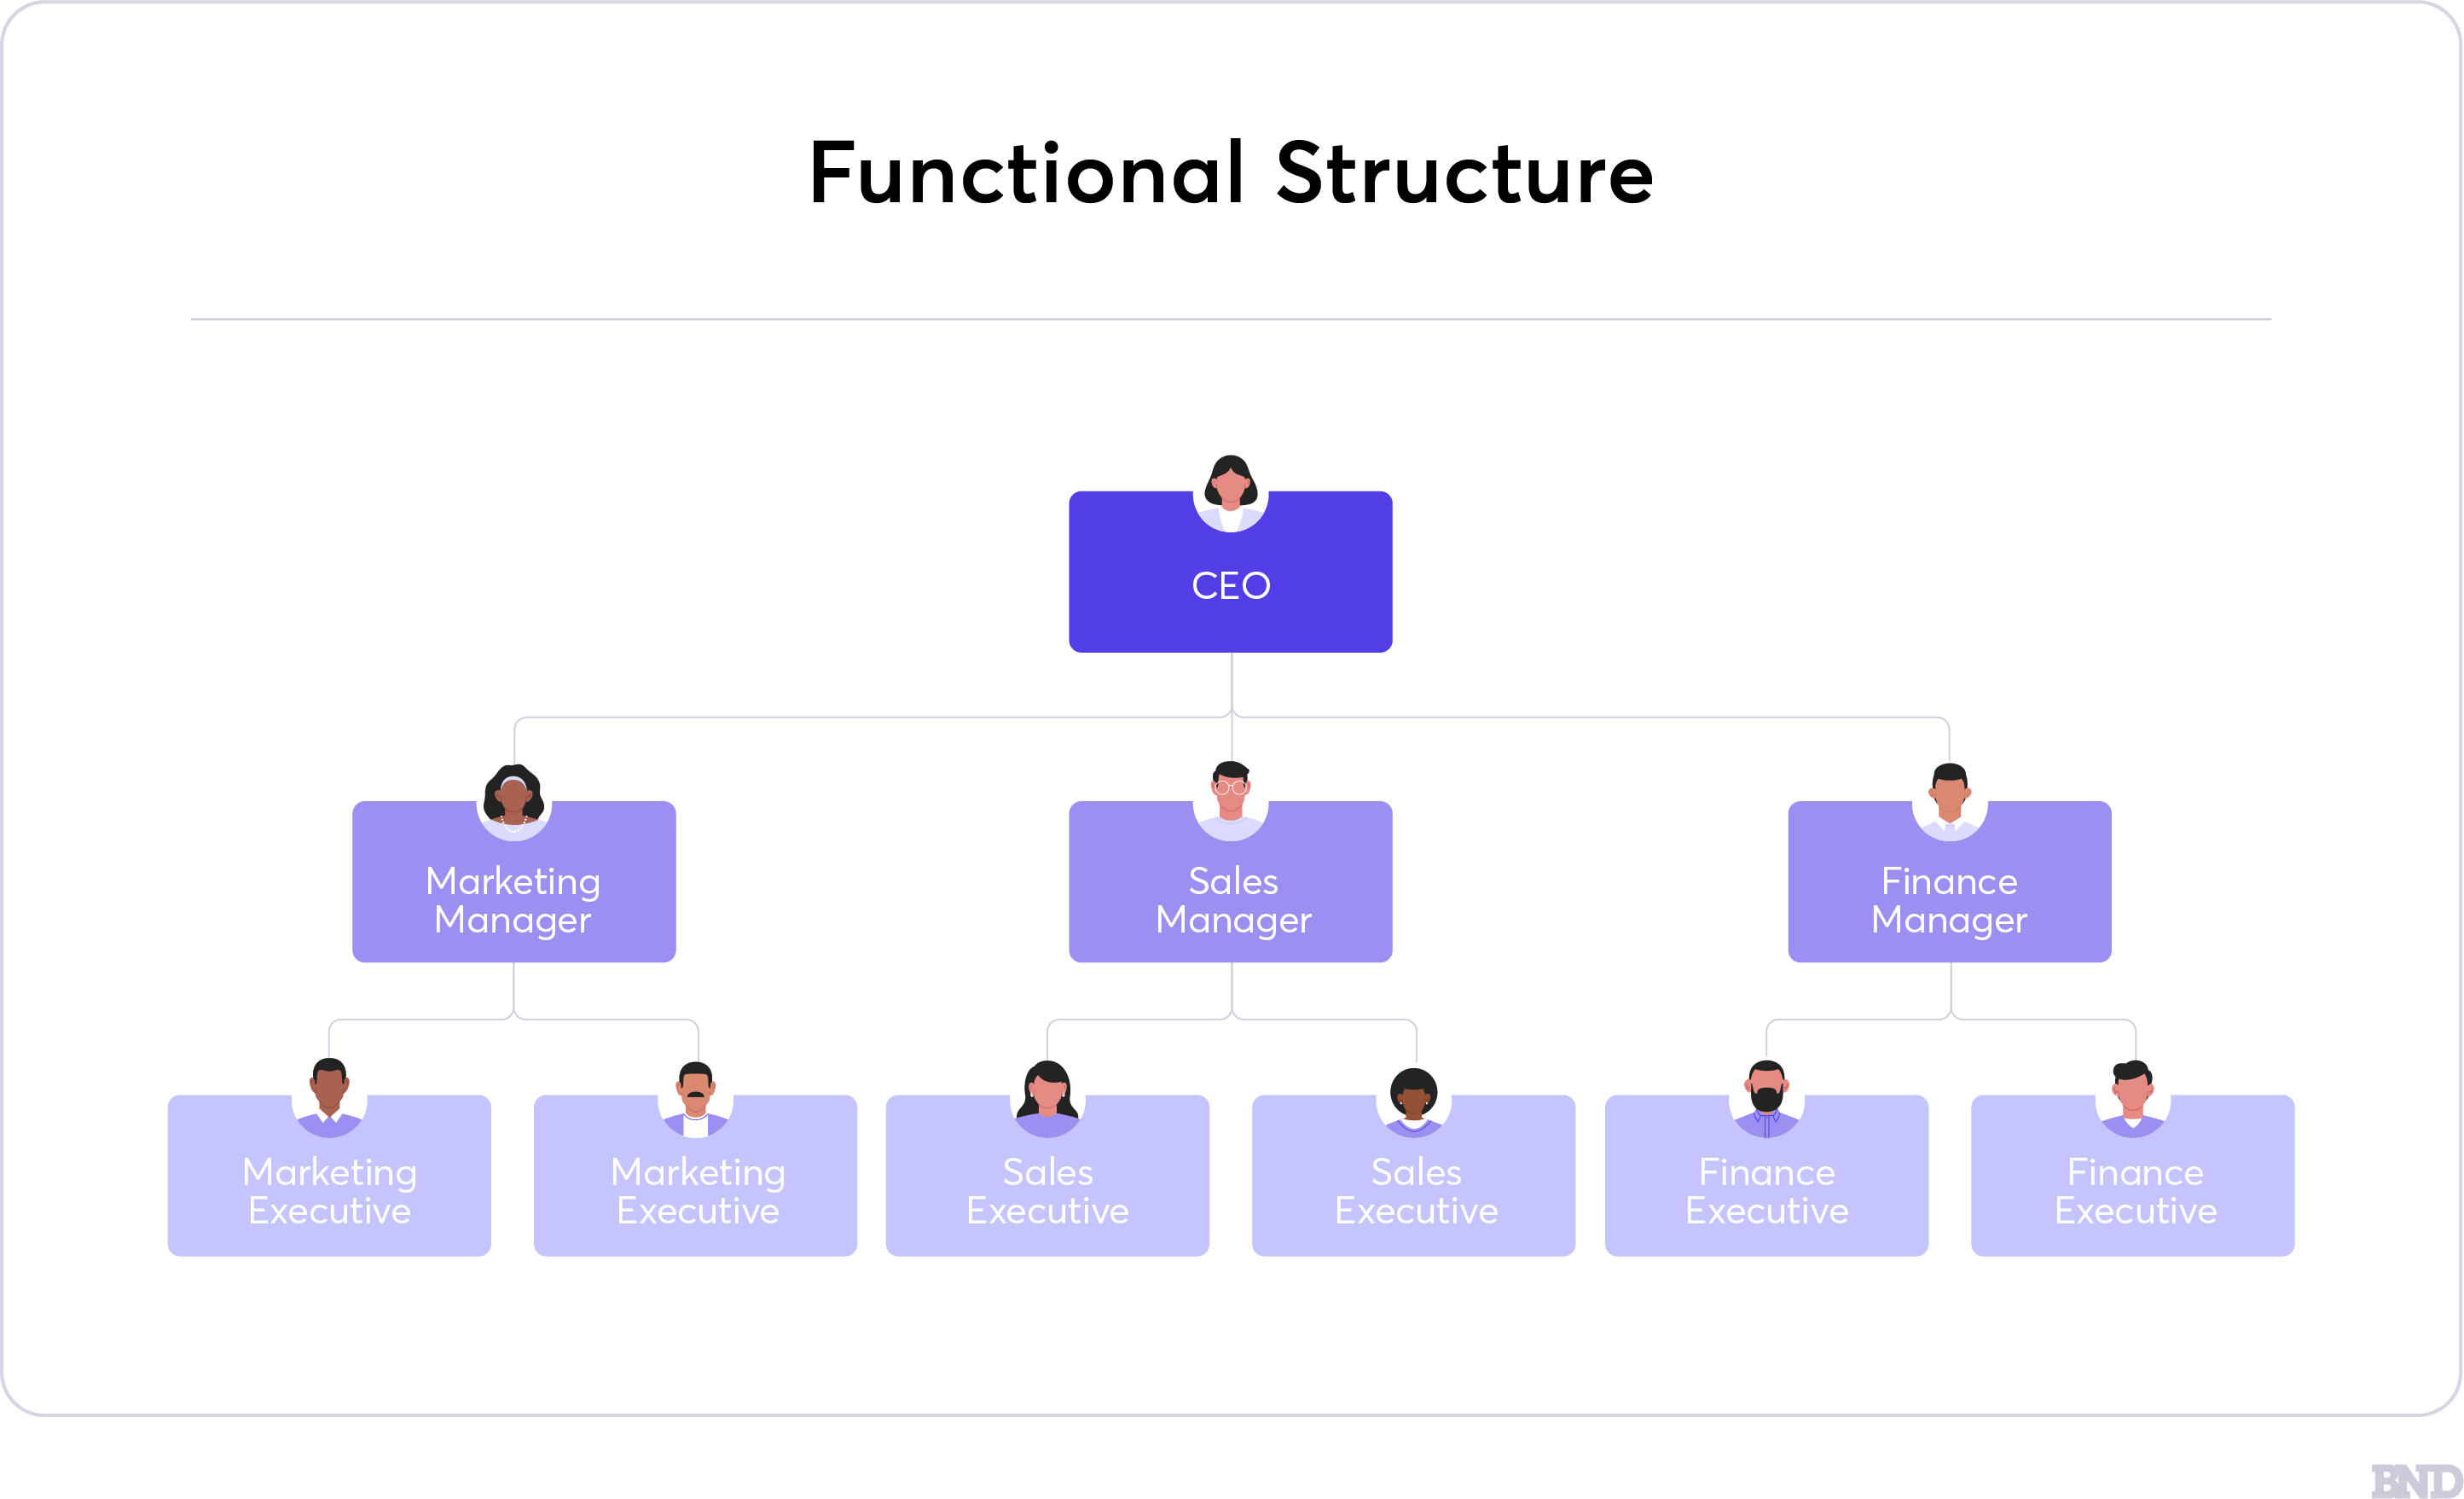 Functional Structure graphic